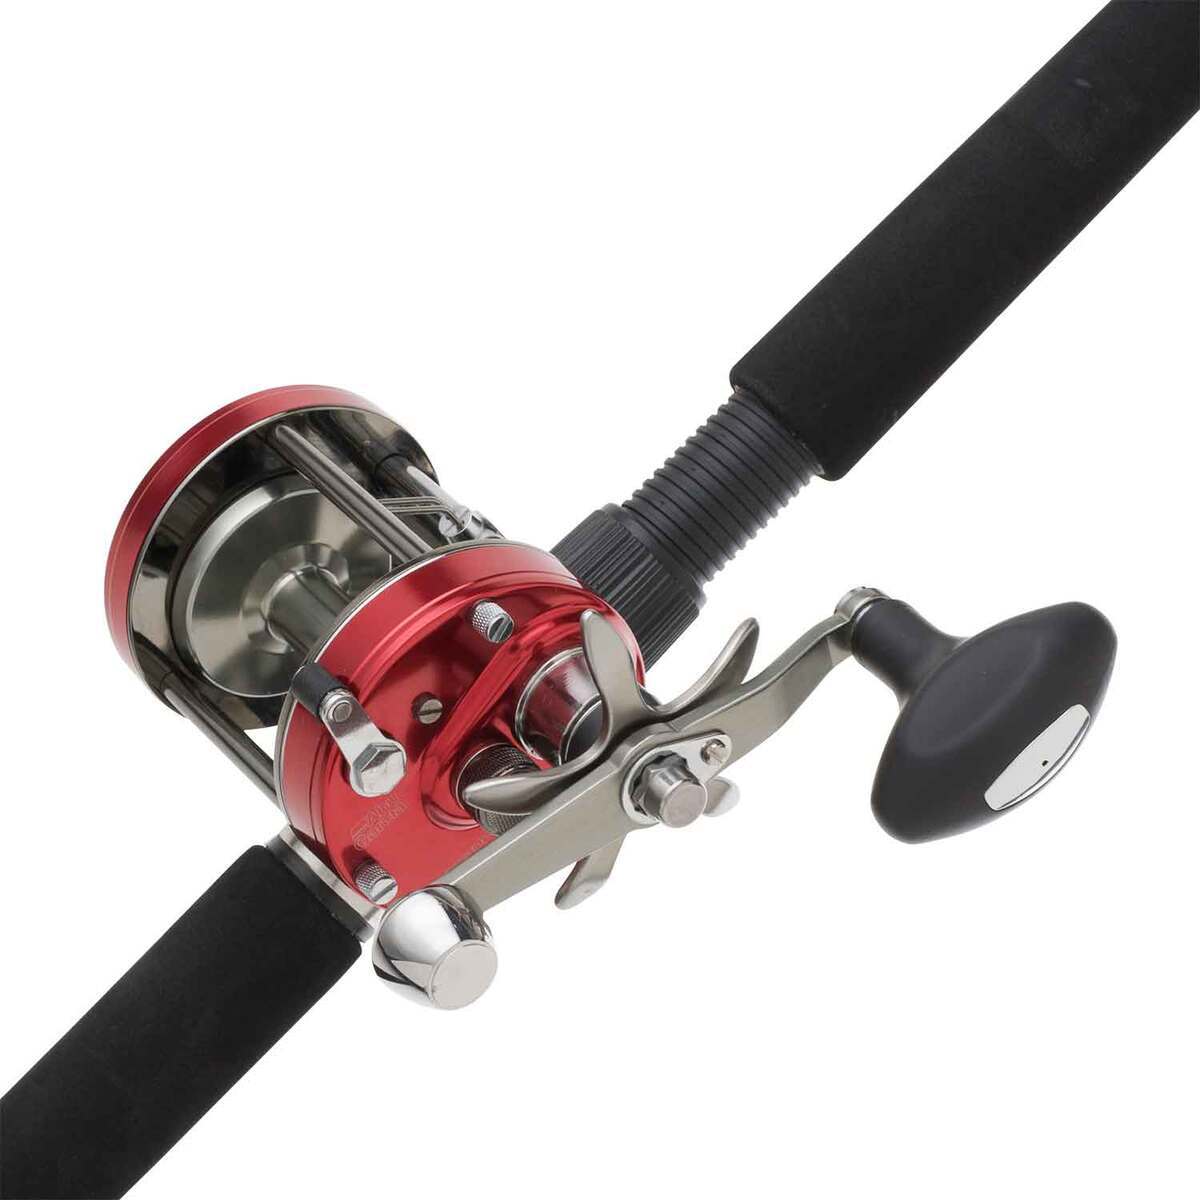 Abu Garcia Fishing Rods & Poles with 7 Guides and 2 Pieces for